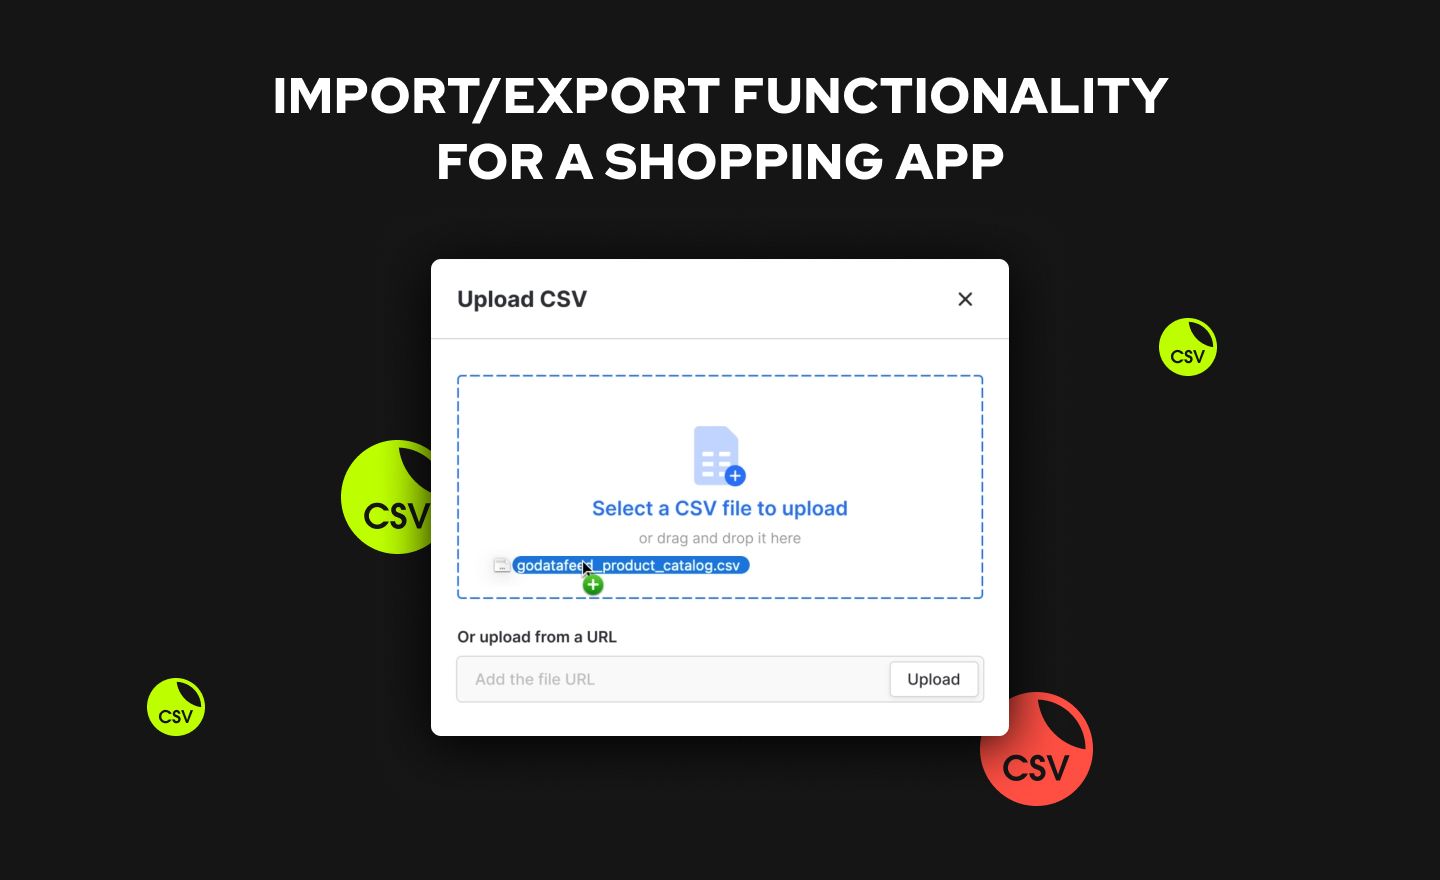 Import/export functionality for a shopping app